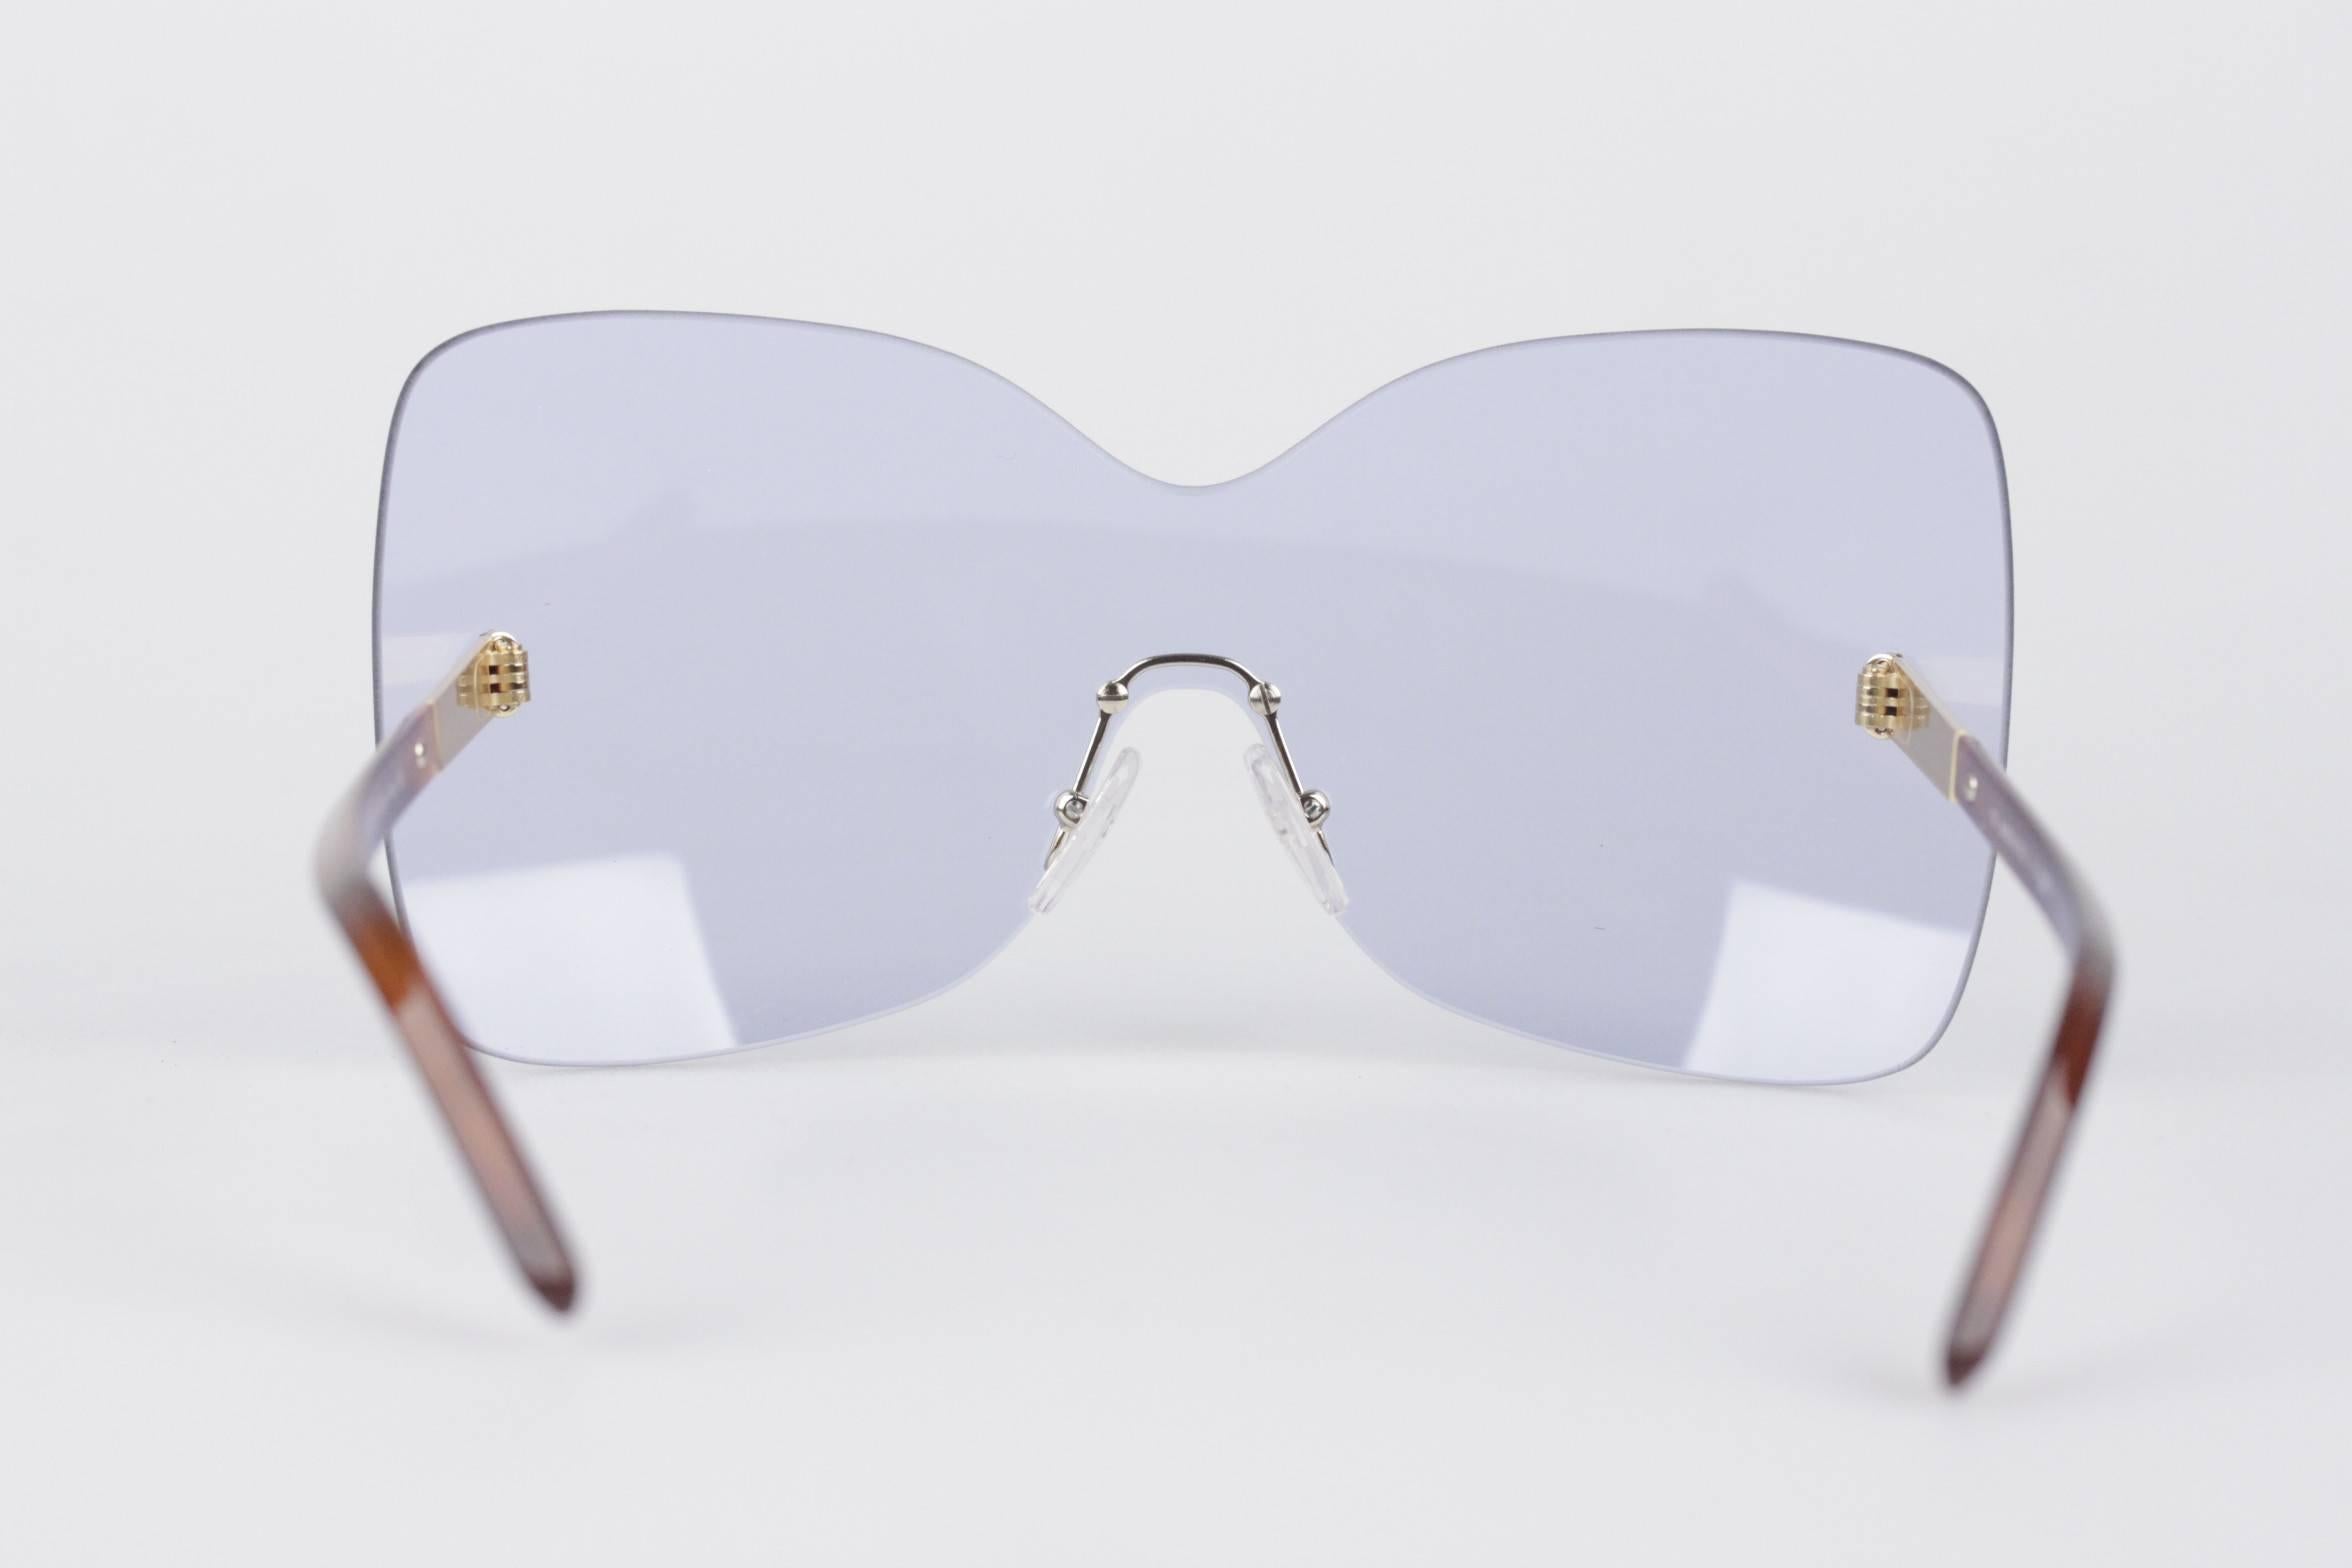  - Futuristic oversized one-piece Sunglasses, from the 2012 Spring/Summer Collection by FENDI
- Model: FS5273
- Color: 424 - Havana/Light Azure
- Rimless design & Butterfly style
- Polycarbonathe one-piece lens
- 100% UV Protection
- FENDI logo